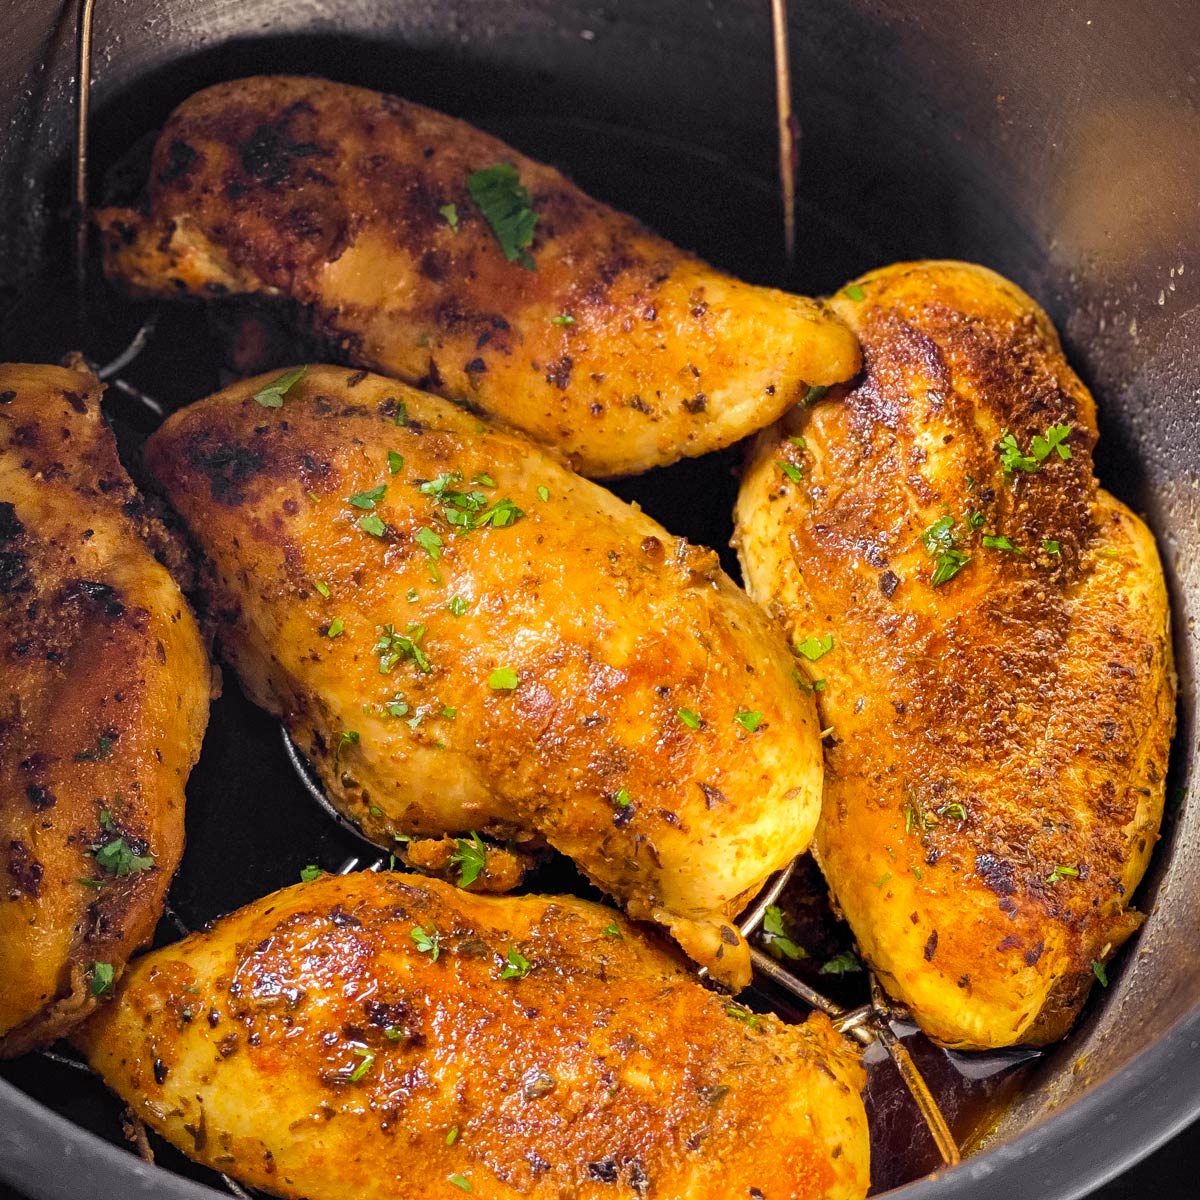 How Do You Fry Chicken In An Electric Pressure Cooker